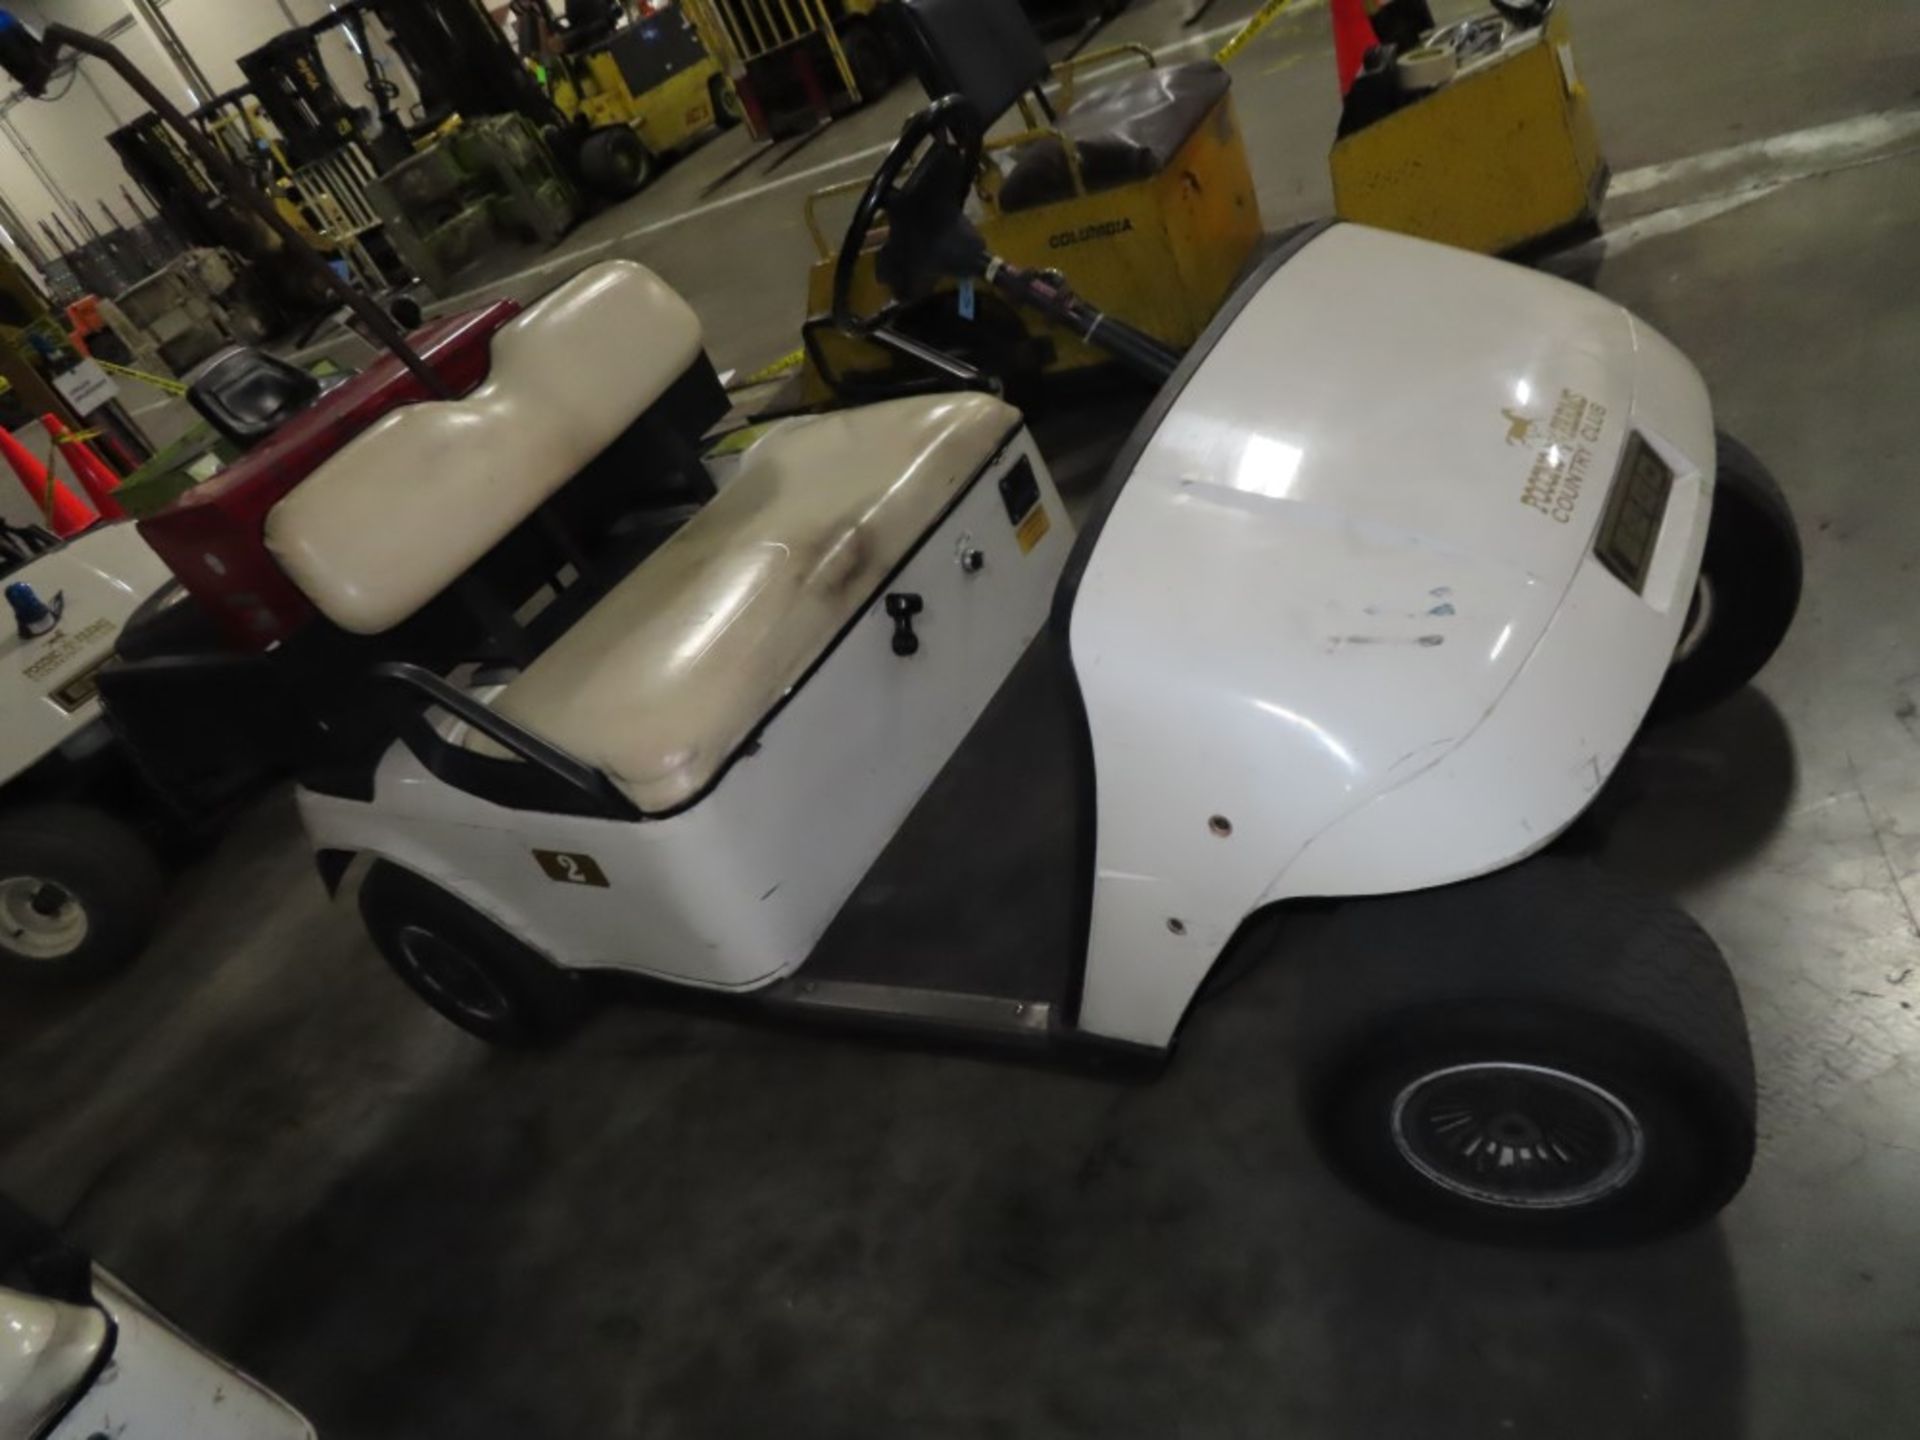 EZ-GO BATTERY POWERED GOLF CART, W/ CHARGER - Image 2 of 3